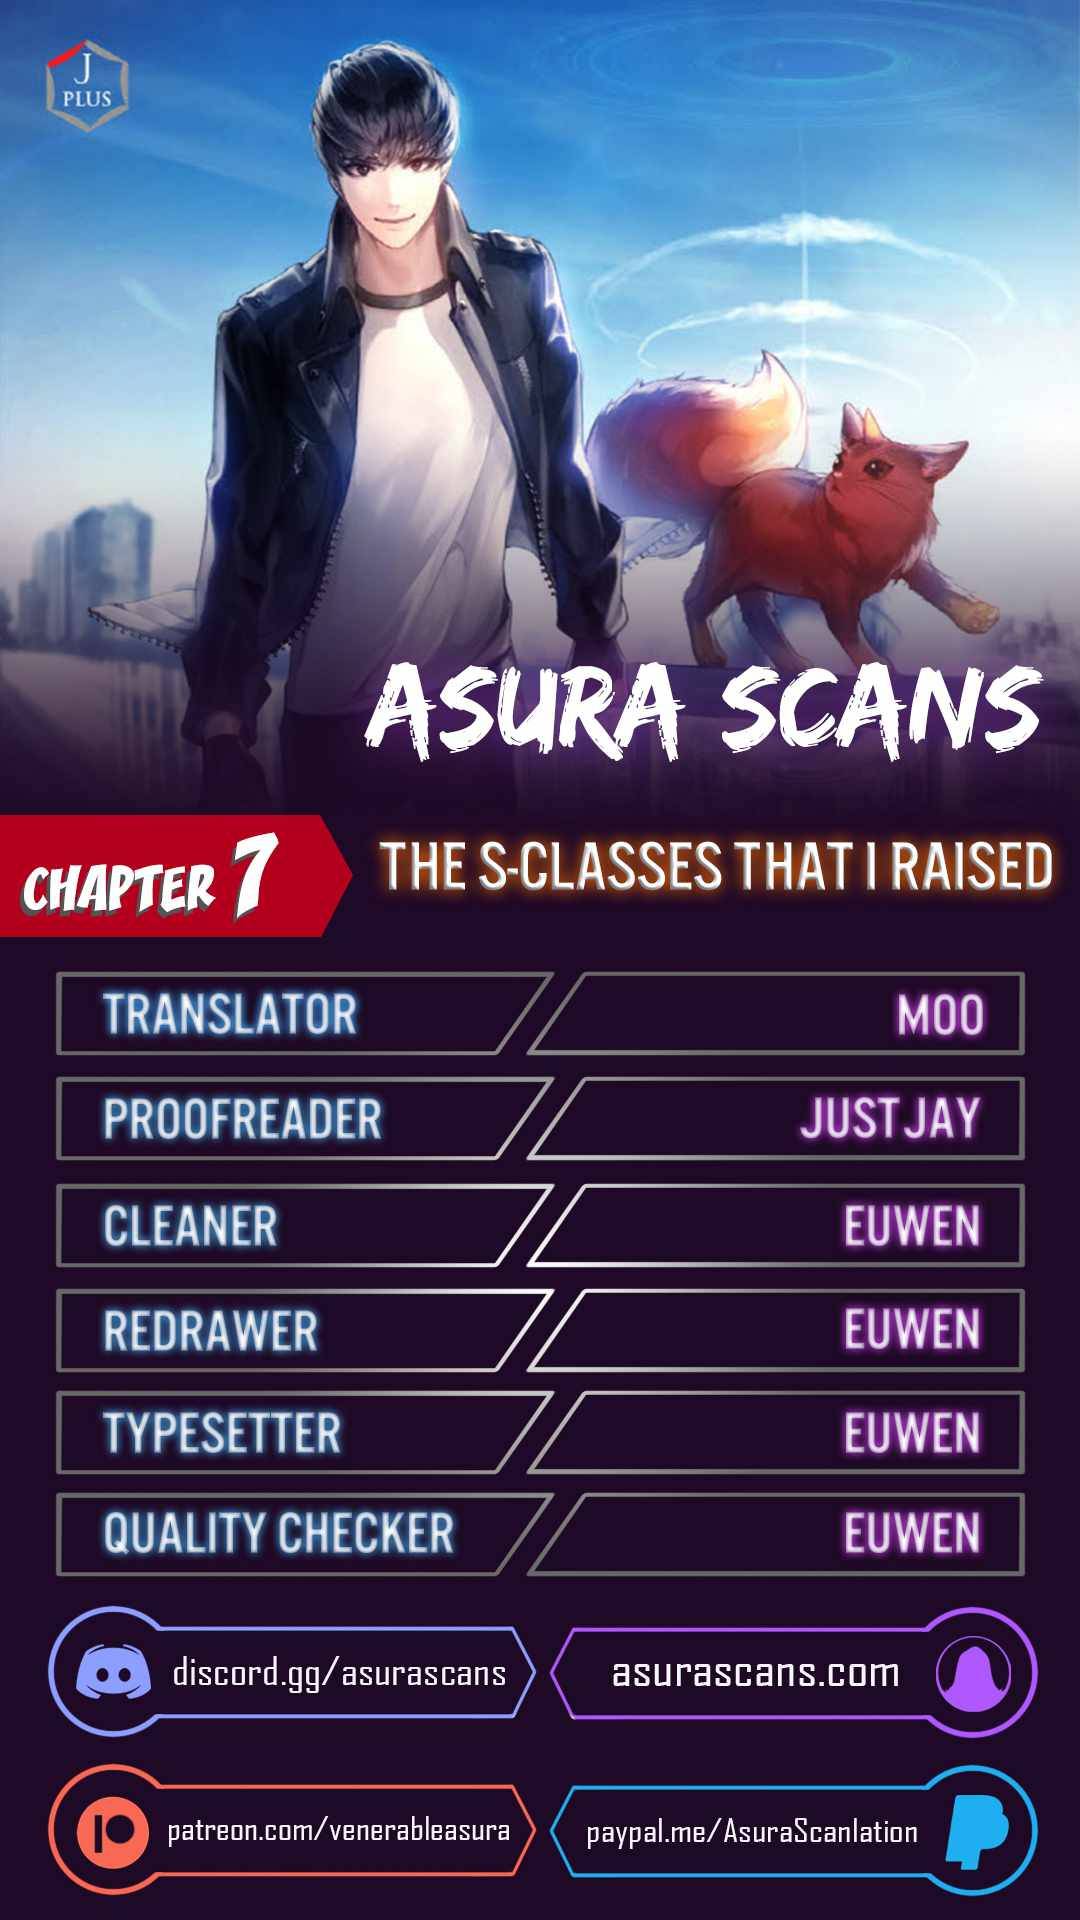 The S-Classes That I Raised chapter 7